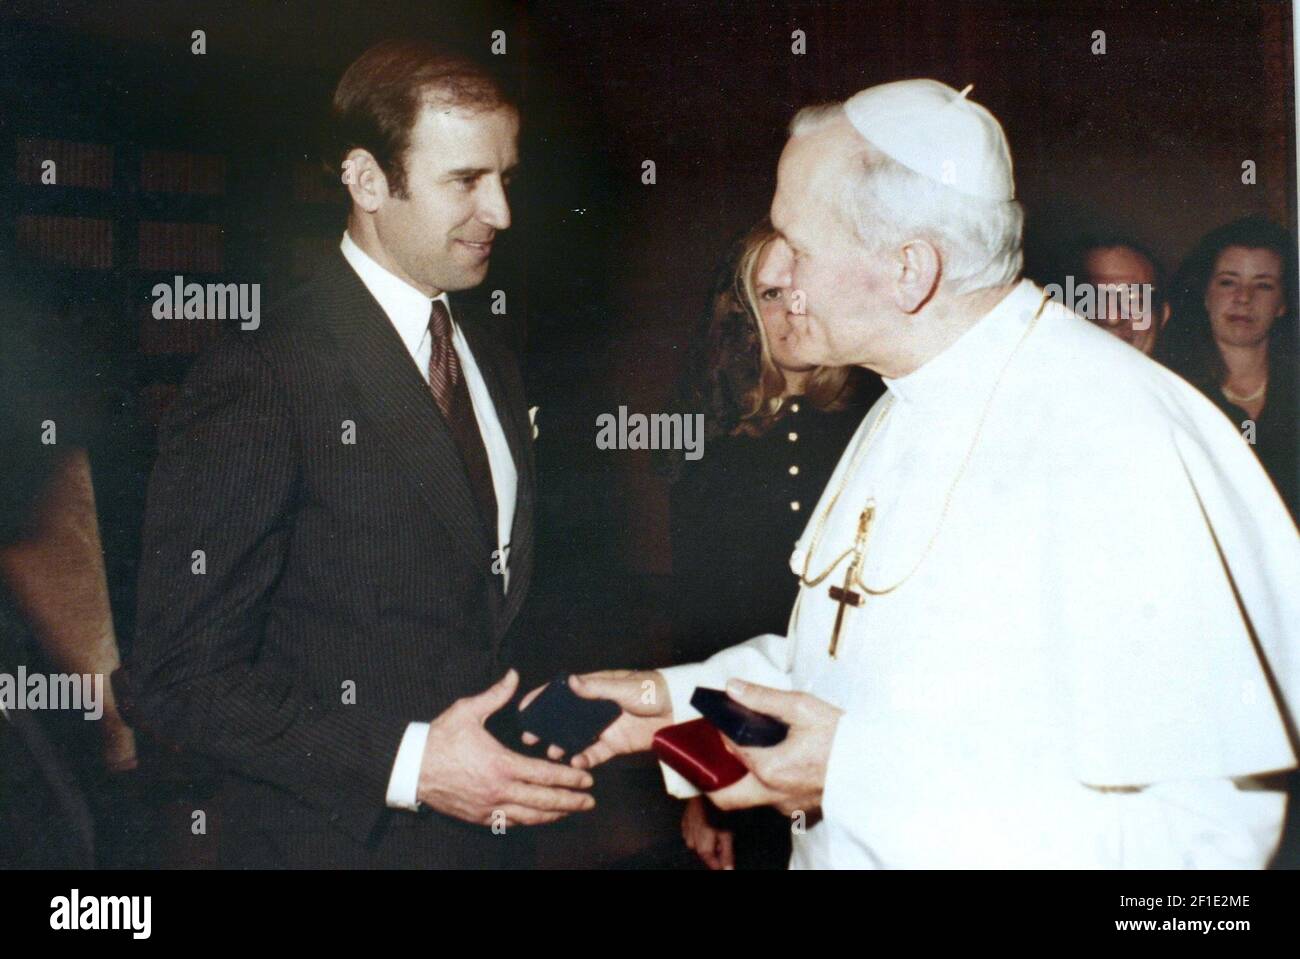 Apr 1, 2005; Wilmington, DE, USA; 04/01/05 - Wilmington, DE; Biden - Senator Joe Biden meets privately with Pope John Paul II in April of 1980 in his library at the Vatican. Friday, April 1, 2005. Special to The News Journal/Suchat Pederson Mandatory Credit: Suchat Pederson/The News Journal-USA TODAY NETWORK/Sipa USA Stock Photo